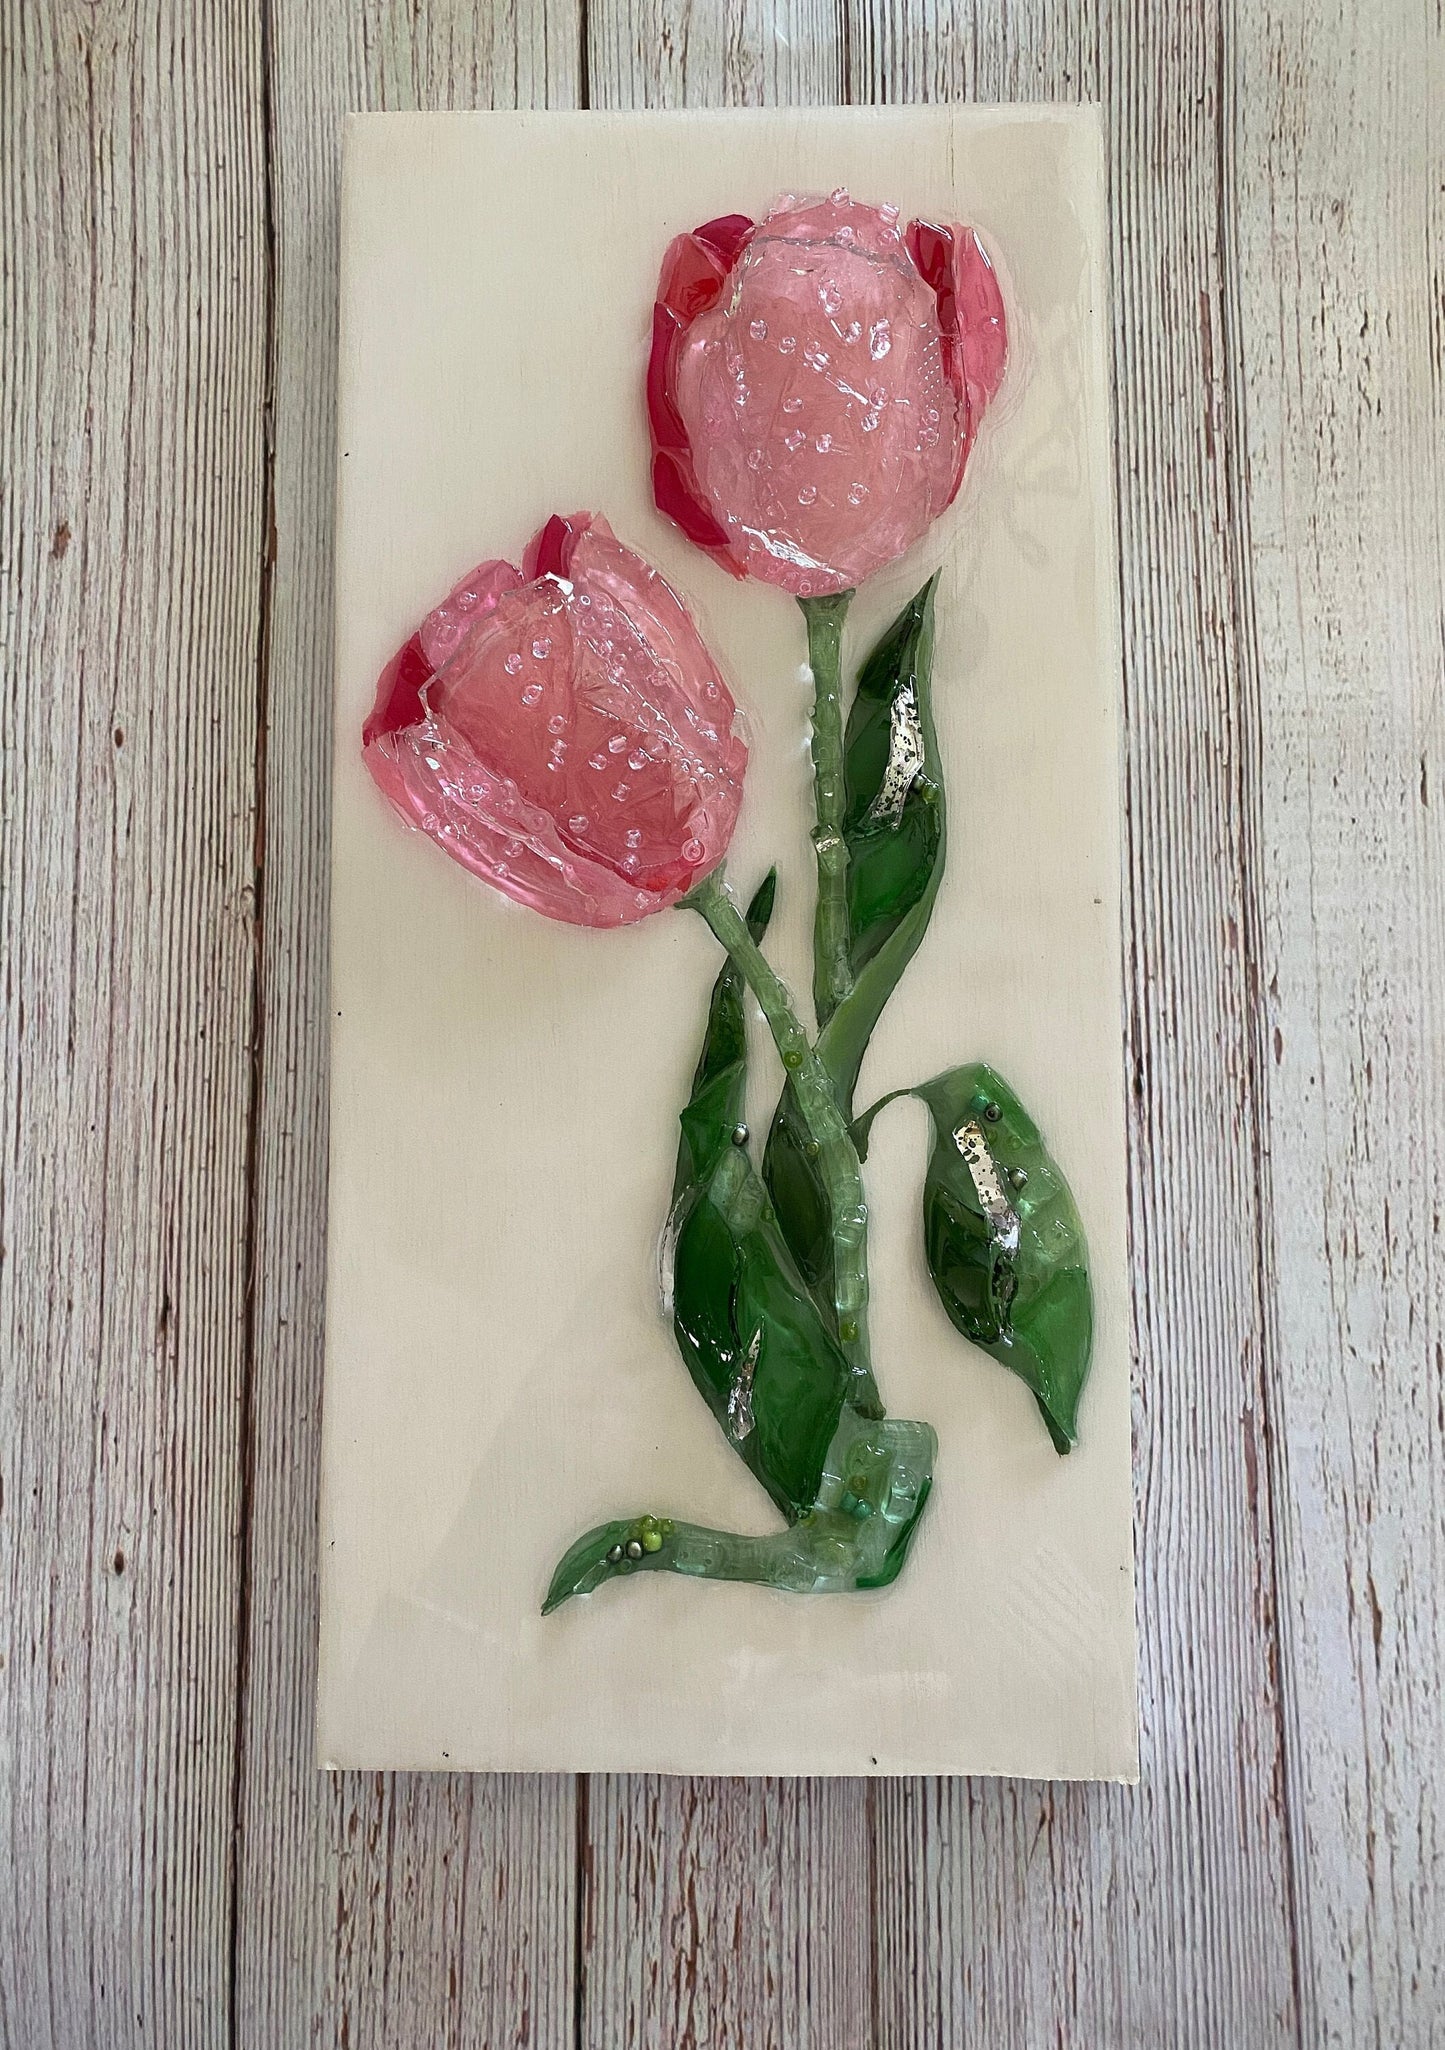 Spring Tulips Art, Tulip Decor, Glass and Resin Art, Spring Mantel Decor, Kitchen  Decor, handmade, Easter Gift, Mother’s Day Gift, Painting